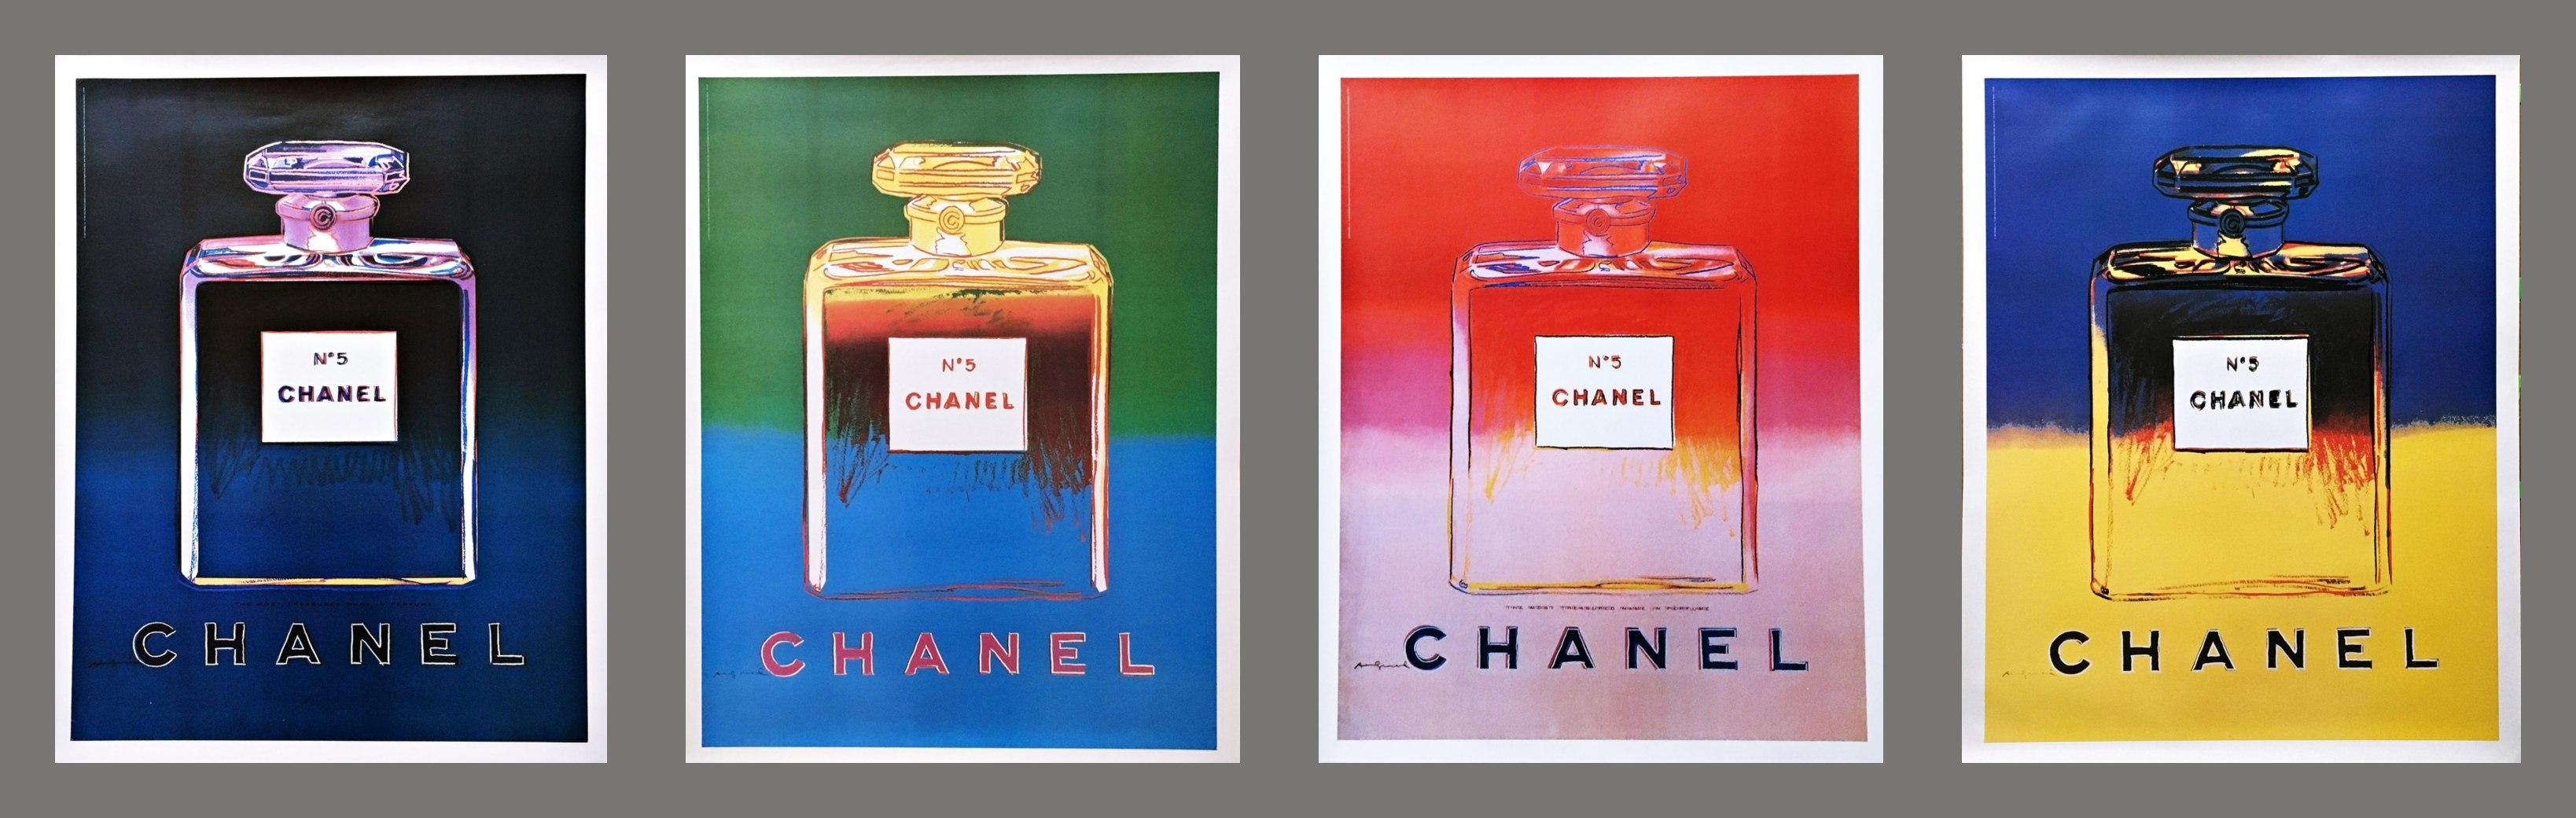 Andy Warhol Abstract Print - Chanel No. 5 (Suite of Four Individual (Separate) Prints on Linen Canvas)